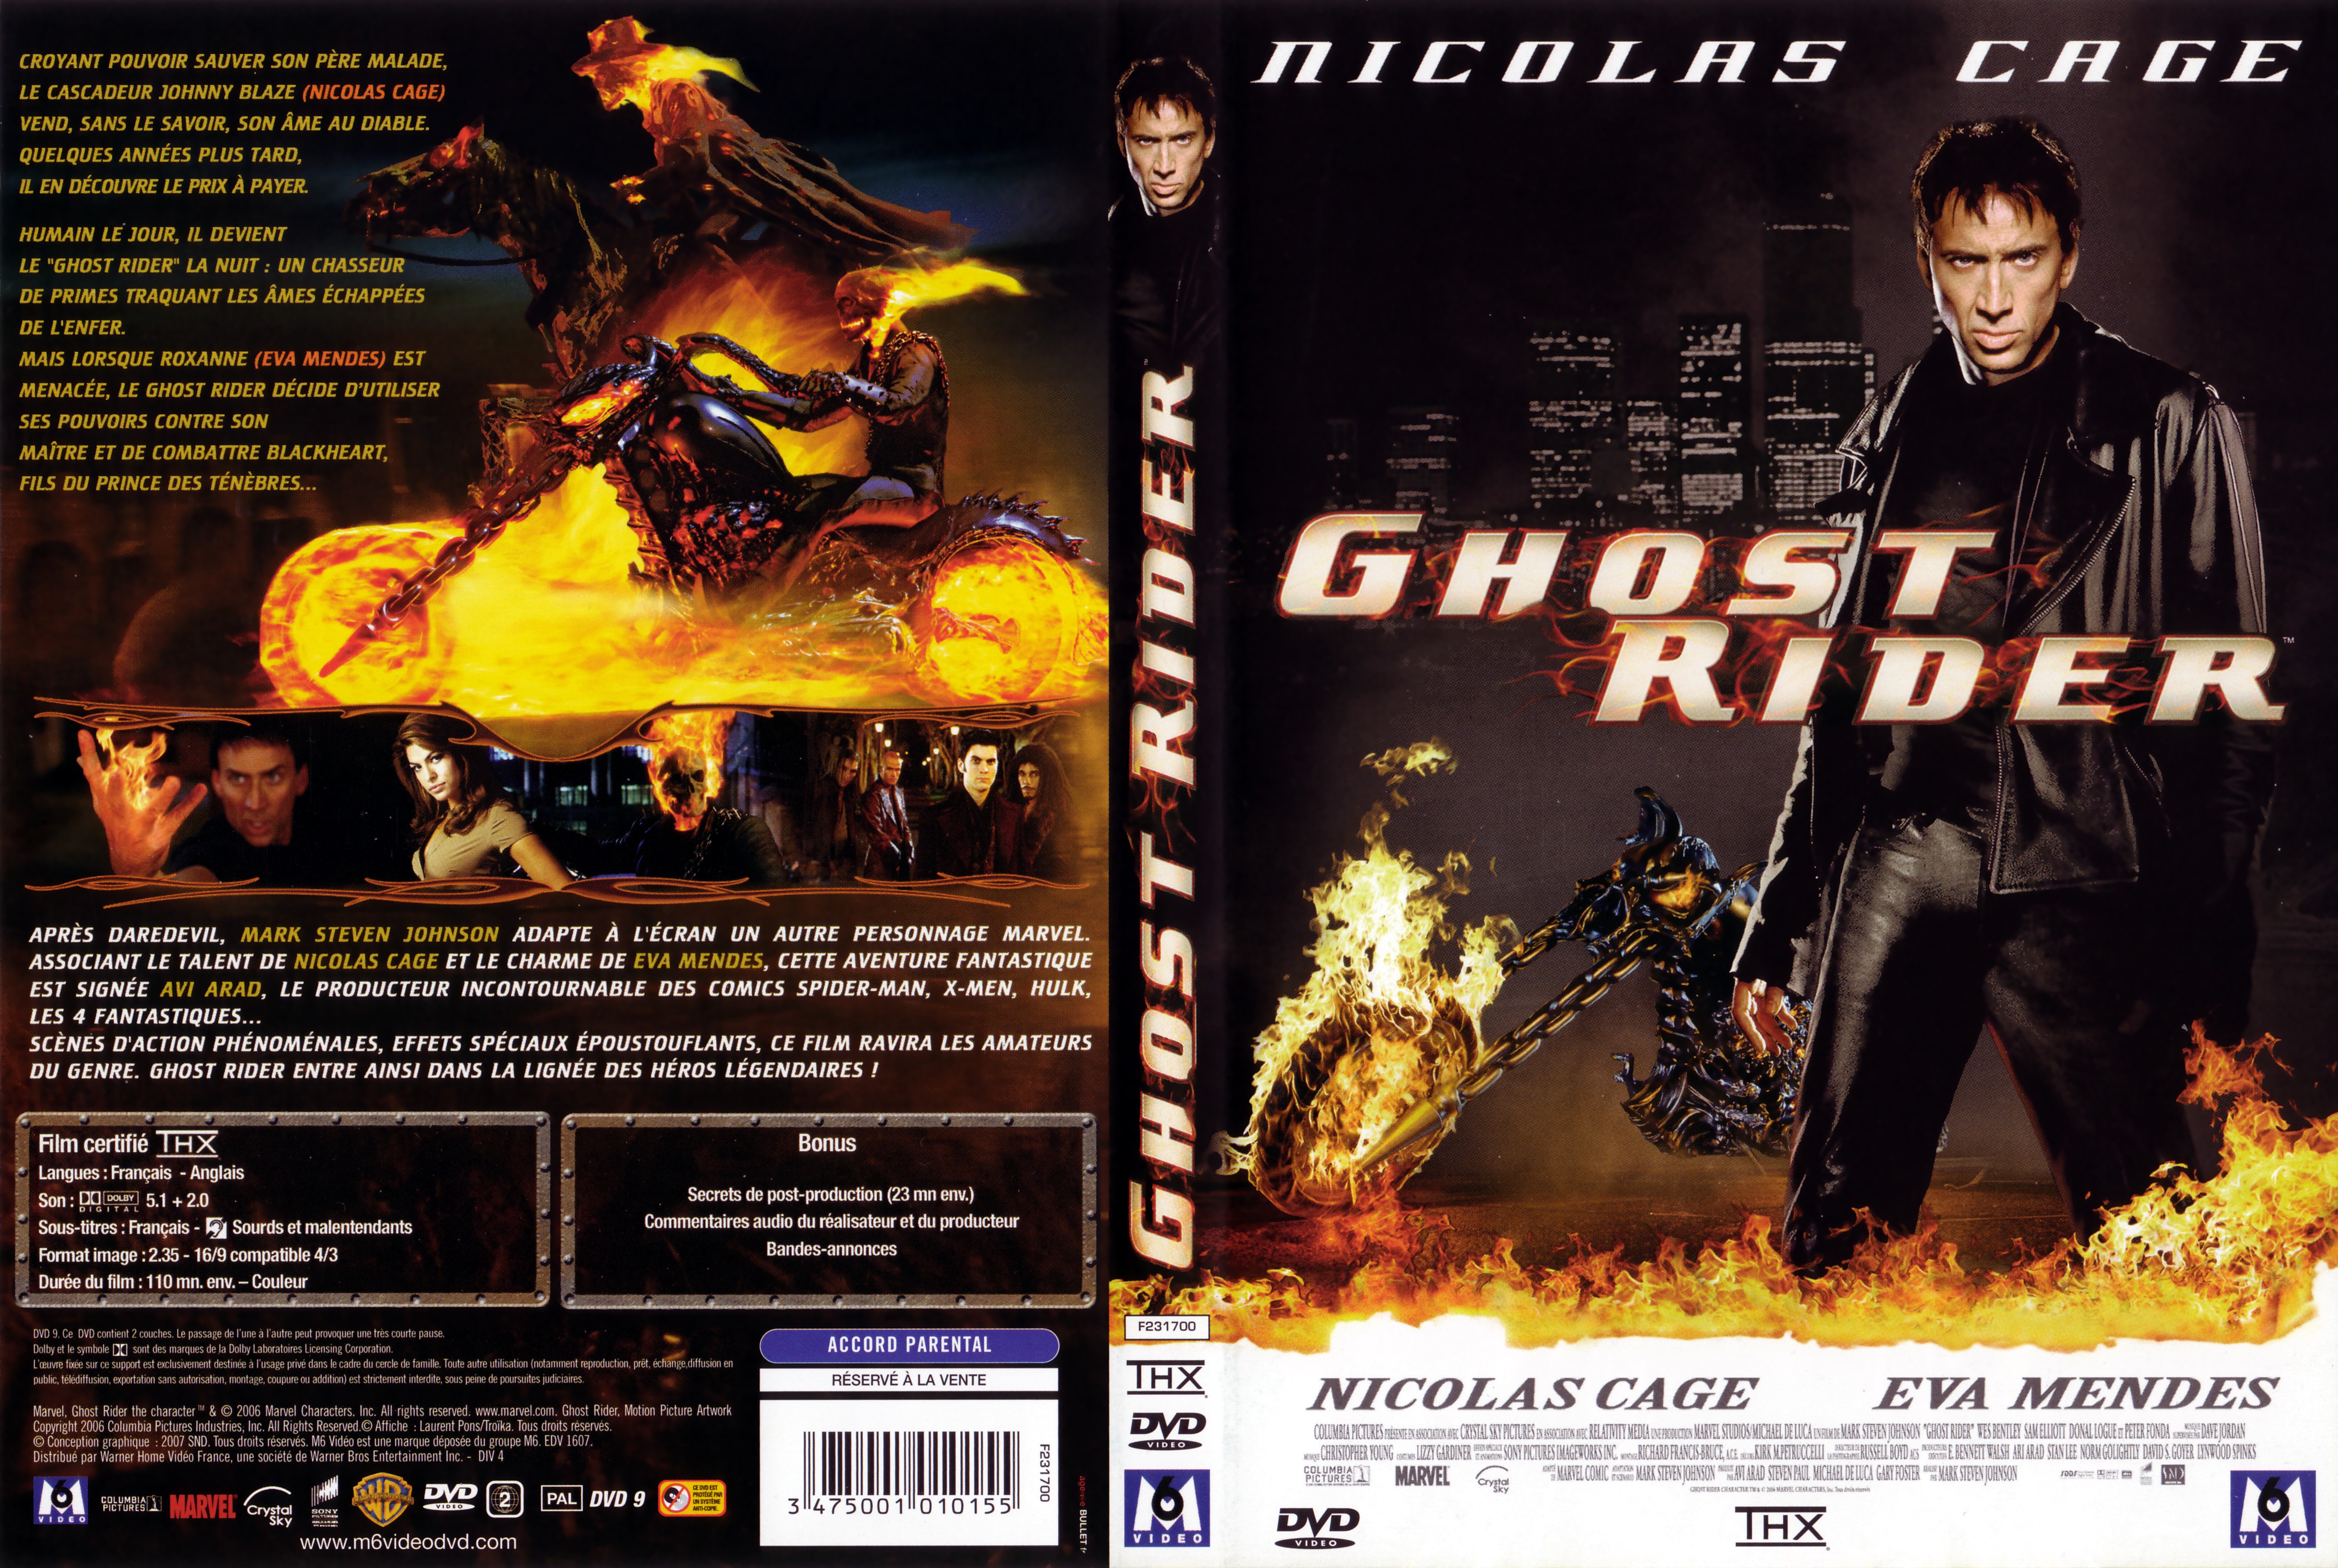 Jaquette DVD Ghost rider